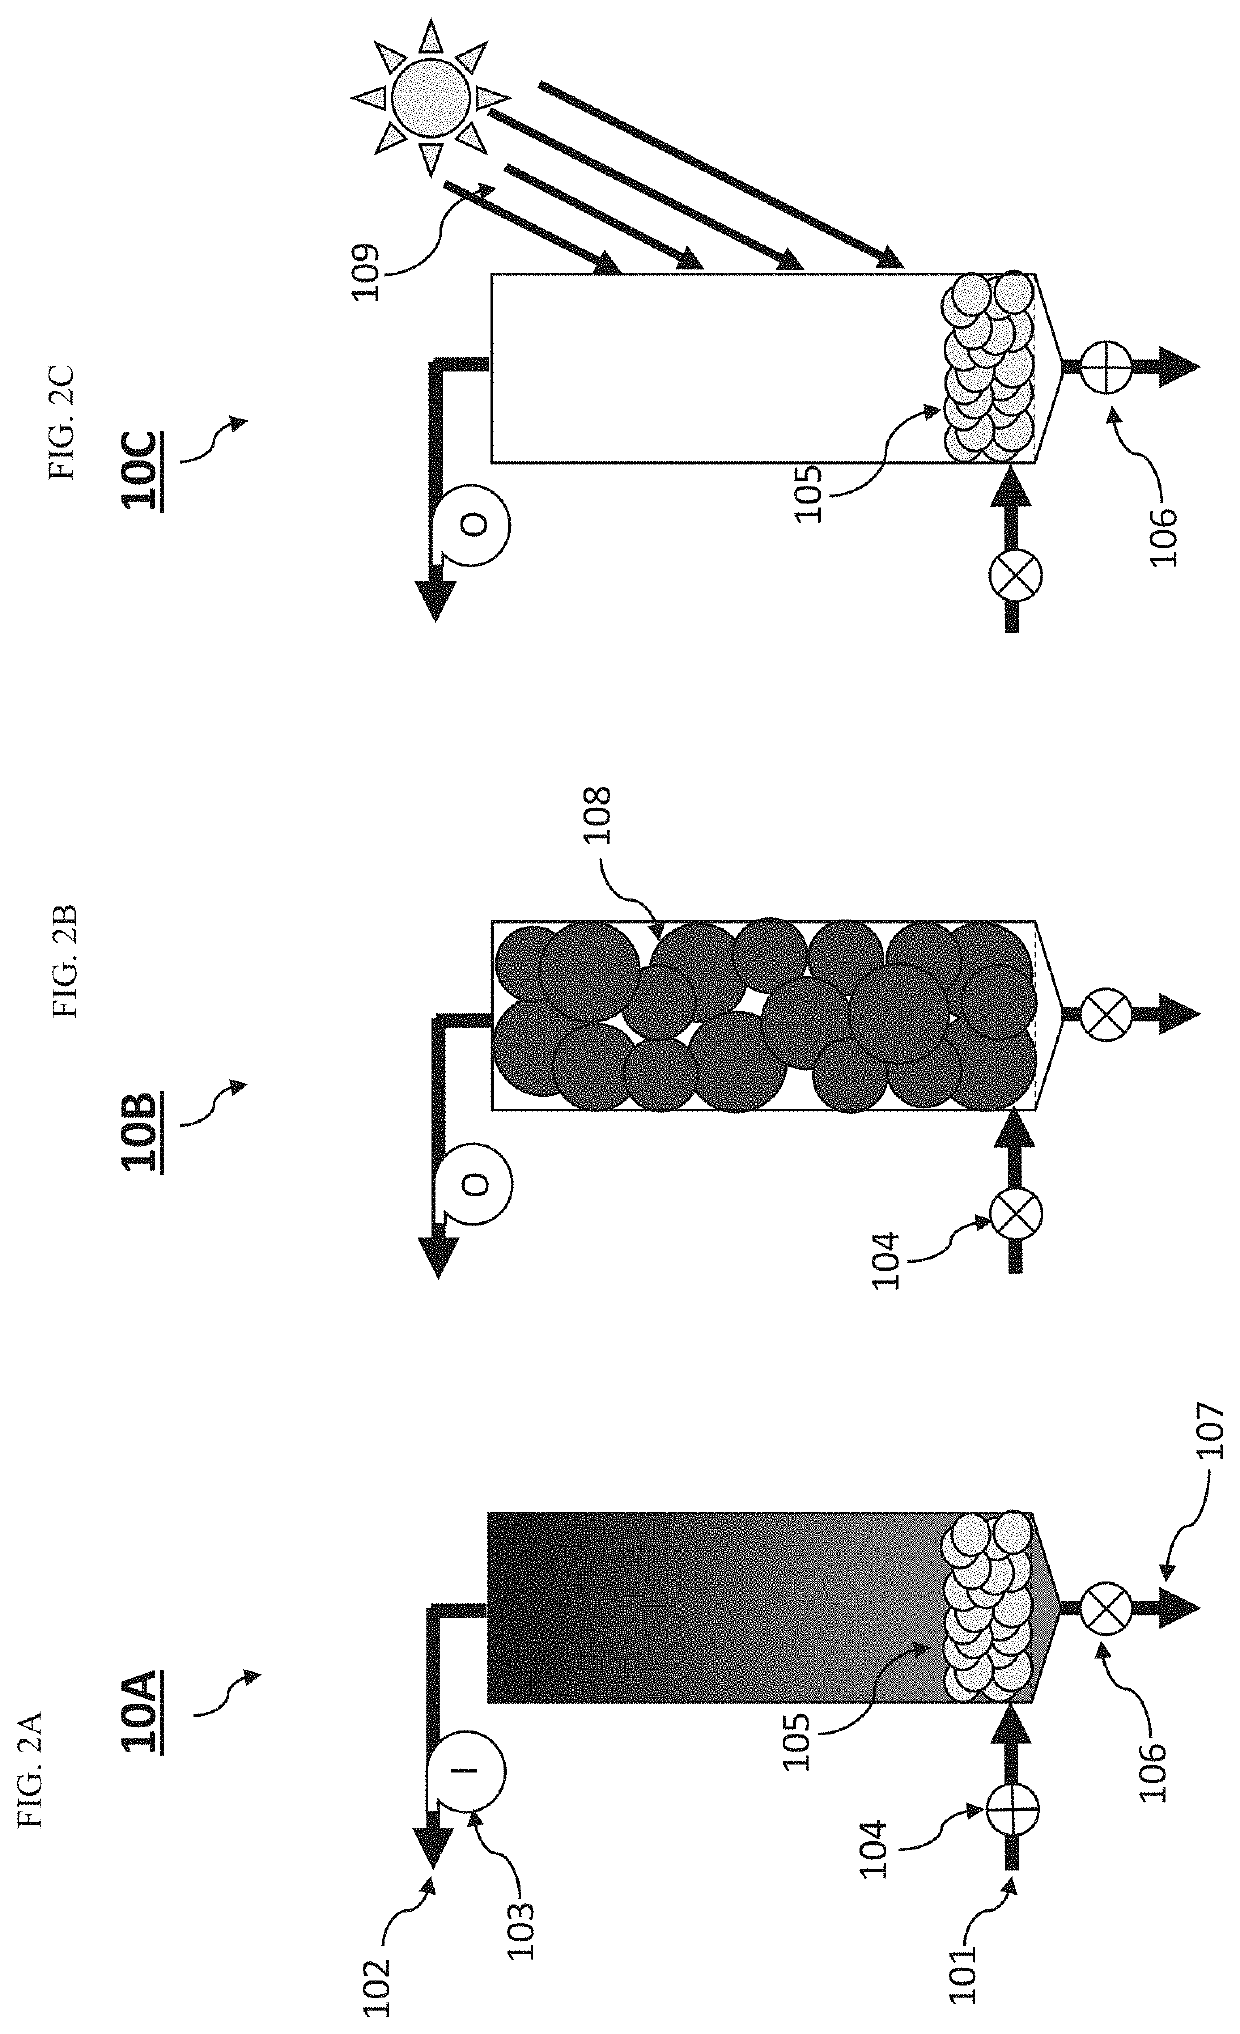 Apparatus and process for separation of water from dissolved solutes by forward osmosis